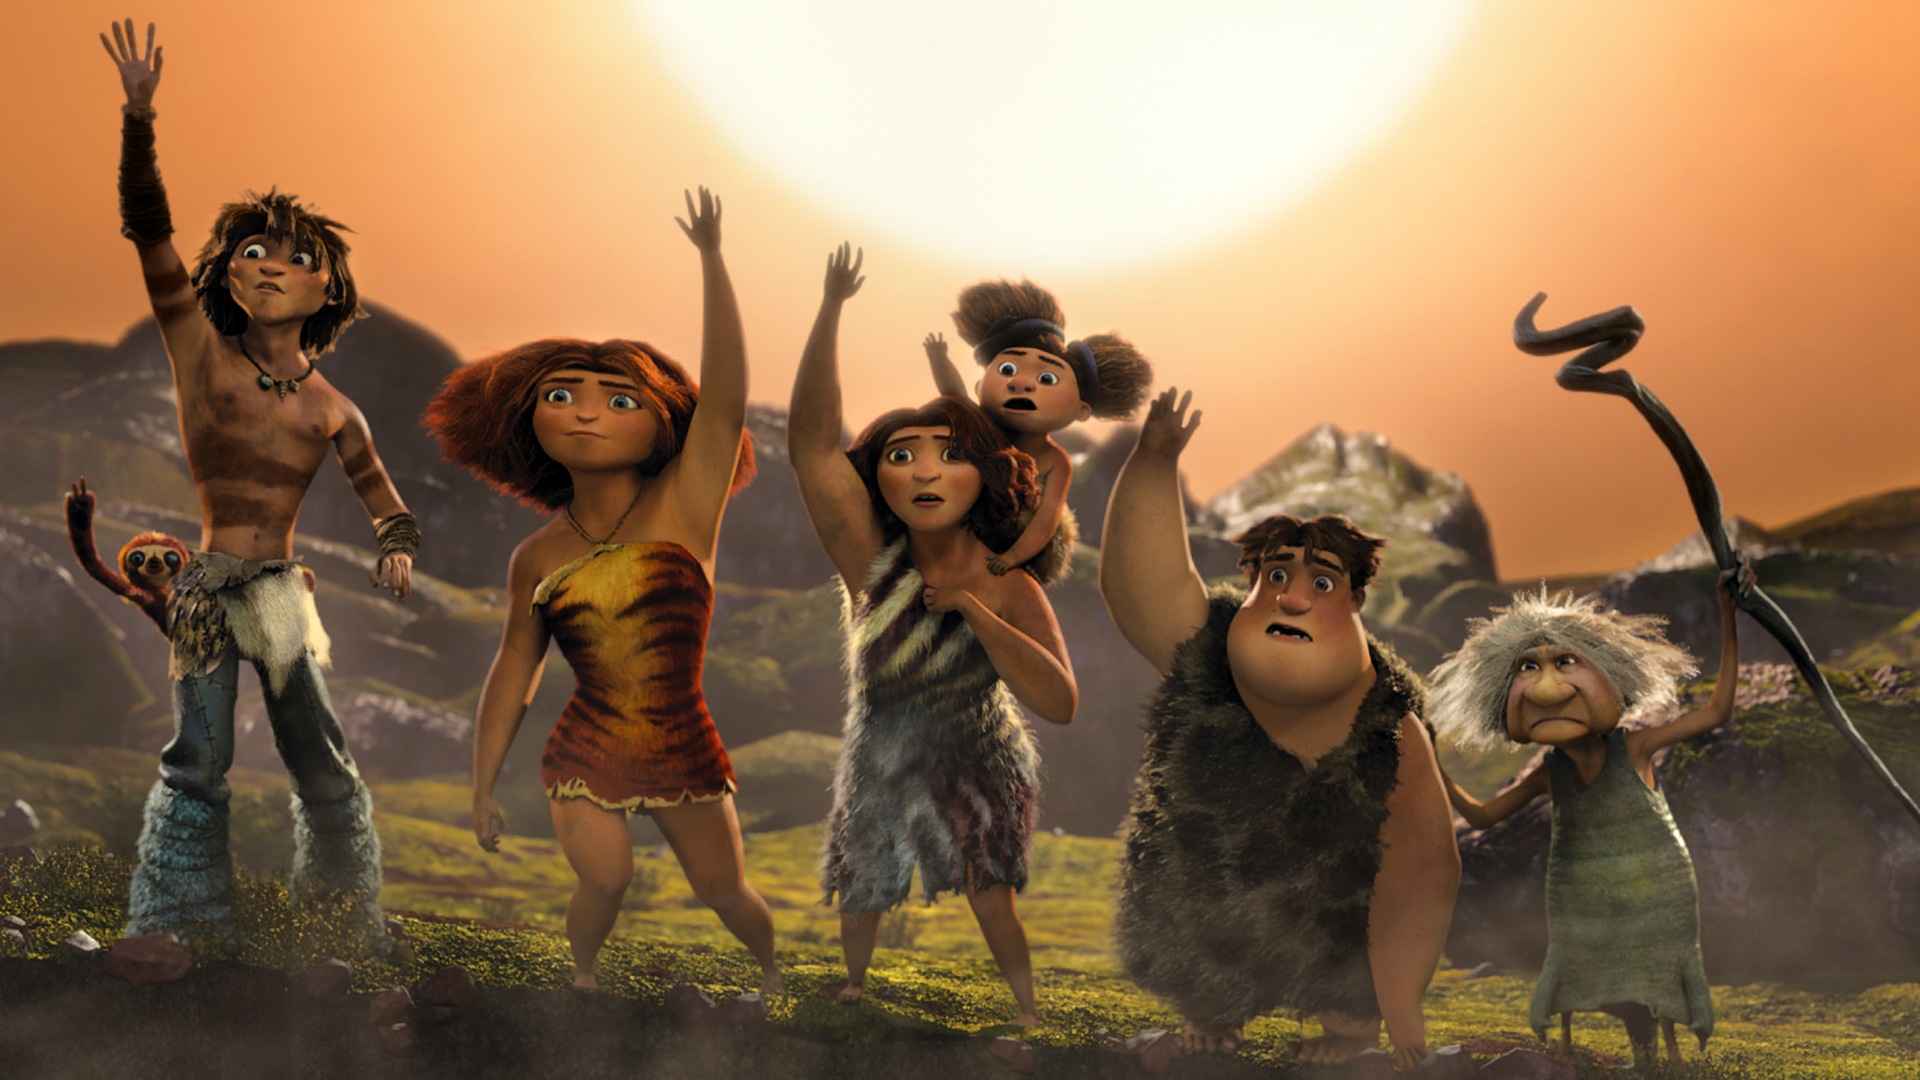 V Croods HD Movie Wallpapers #4 - 1920x1080